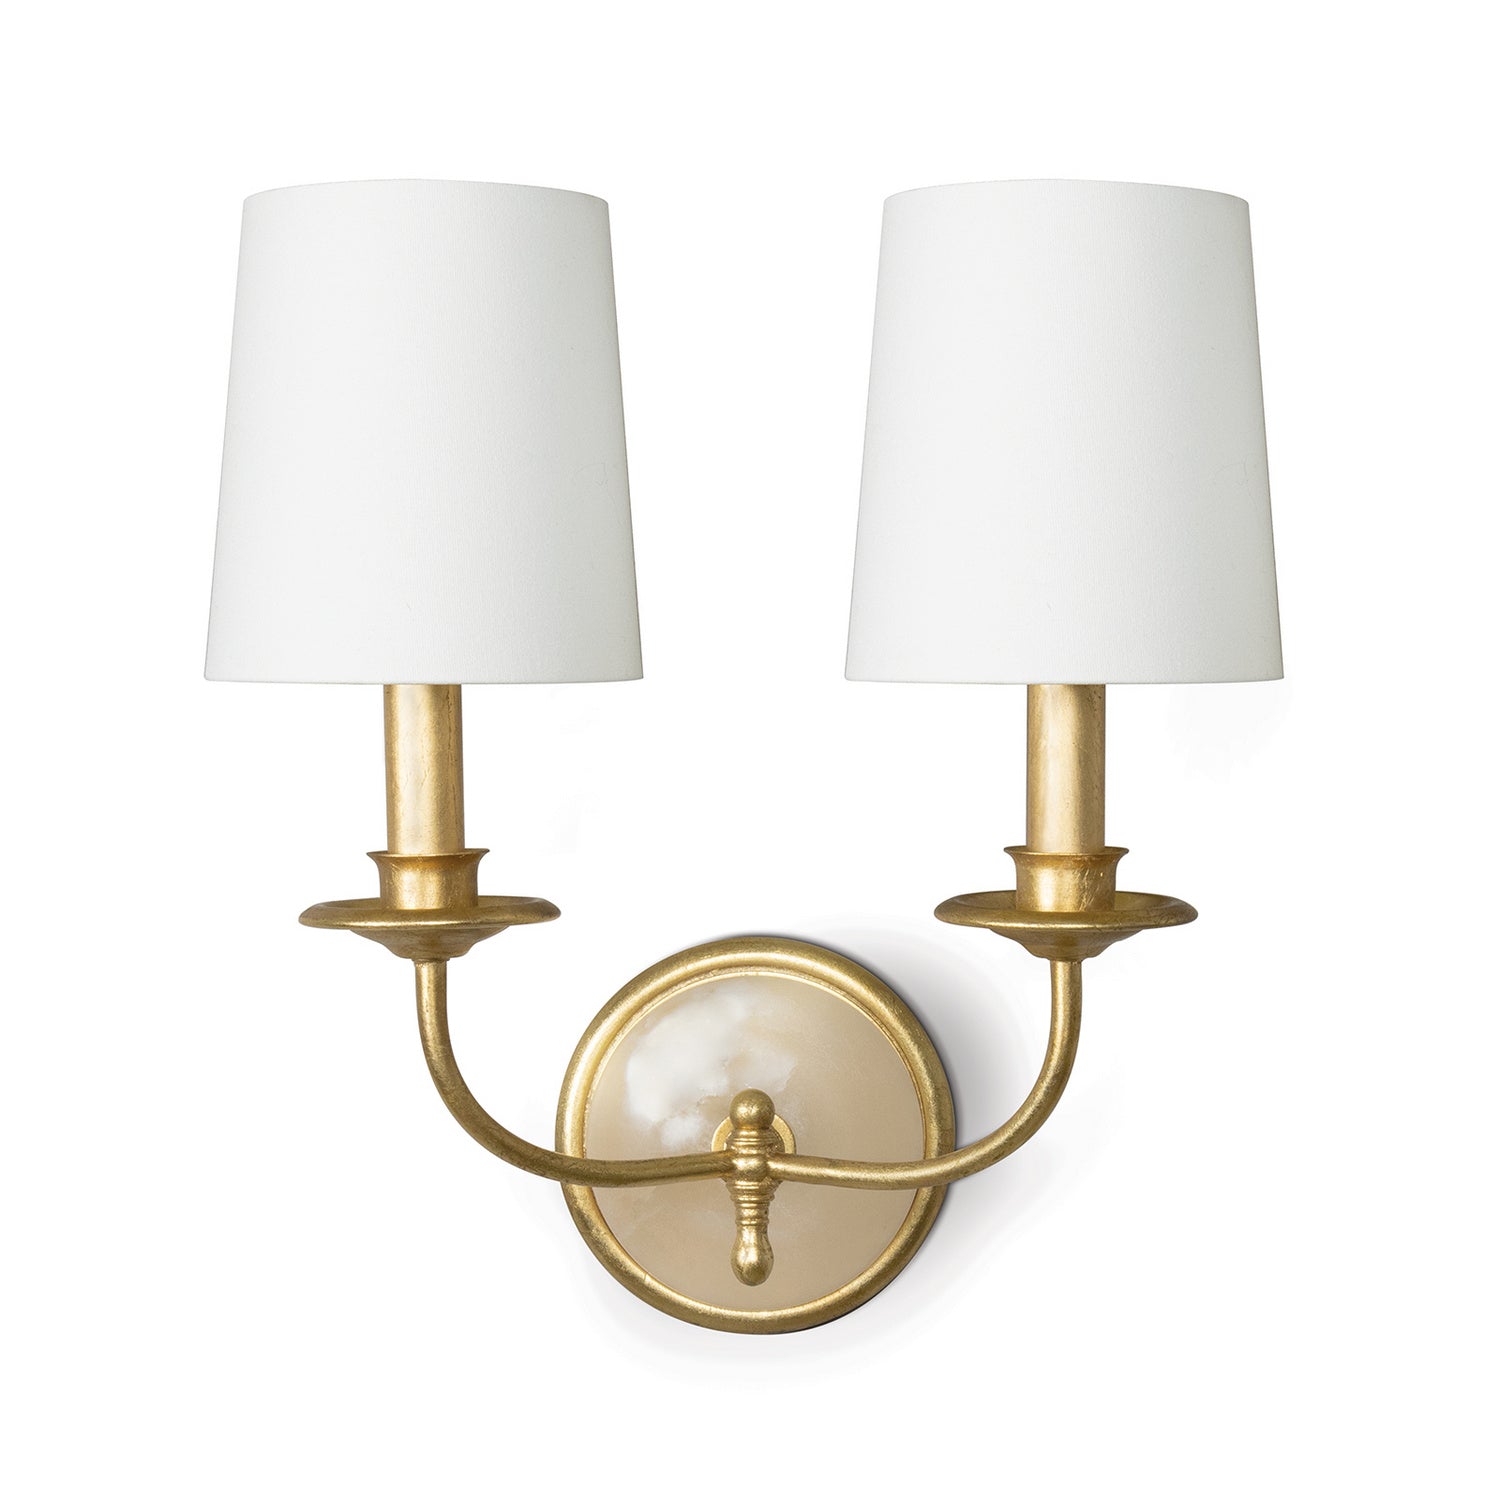 Regina Andrew - 15-1166 - Two Light Wall Sconce - Fisher - Gold Leaf